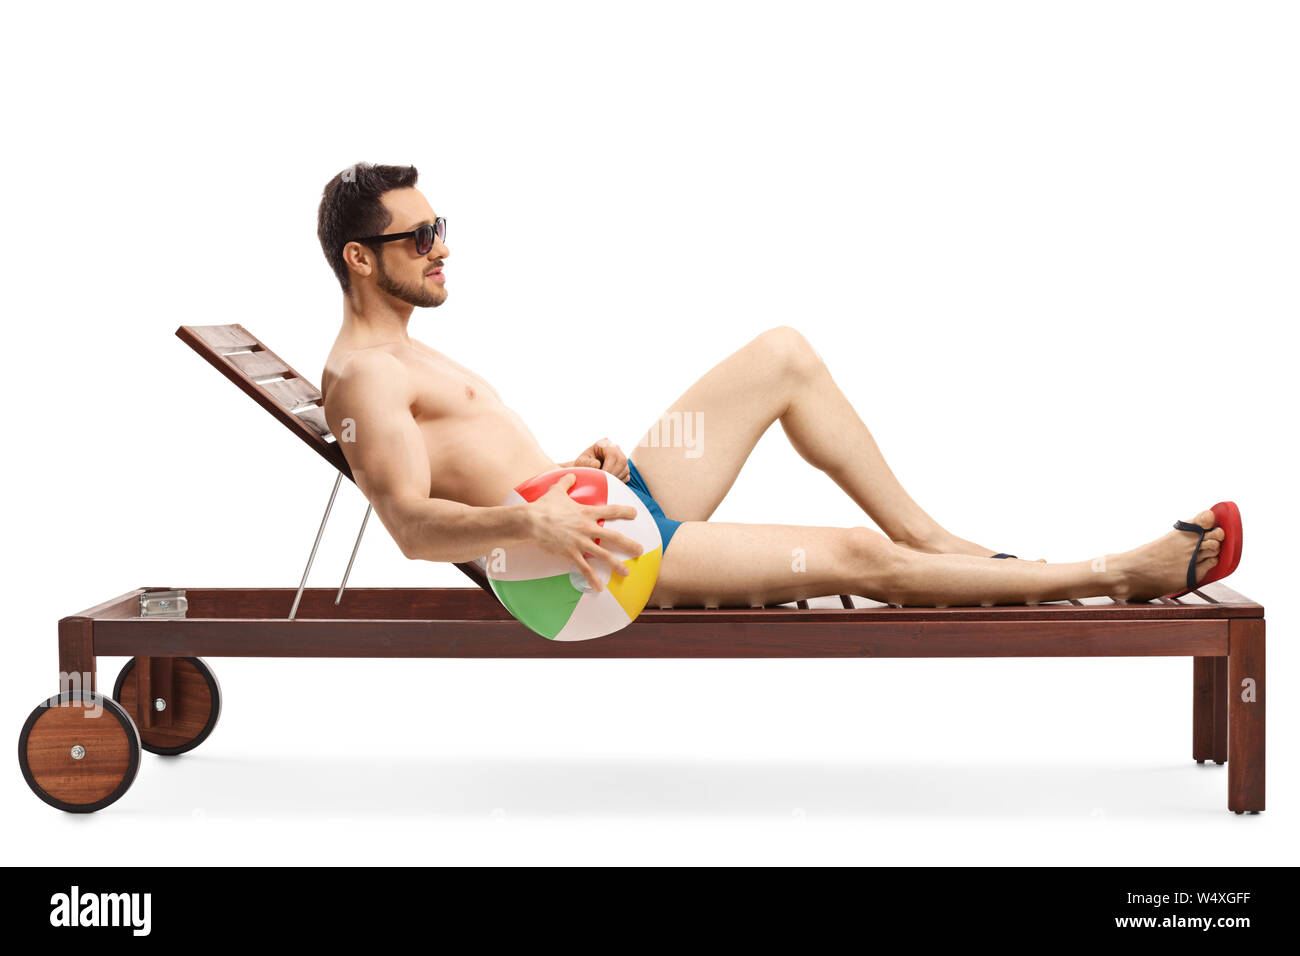 Full length shot of a young fit man on a sunbed holding an inflatable ball isolated on white background Stock Photo